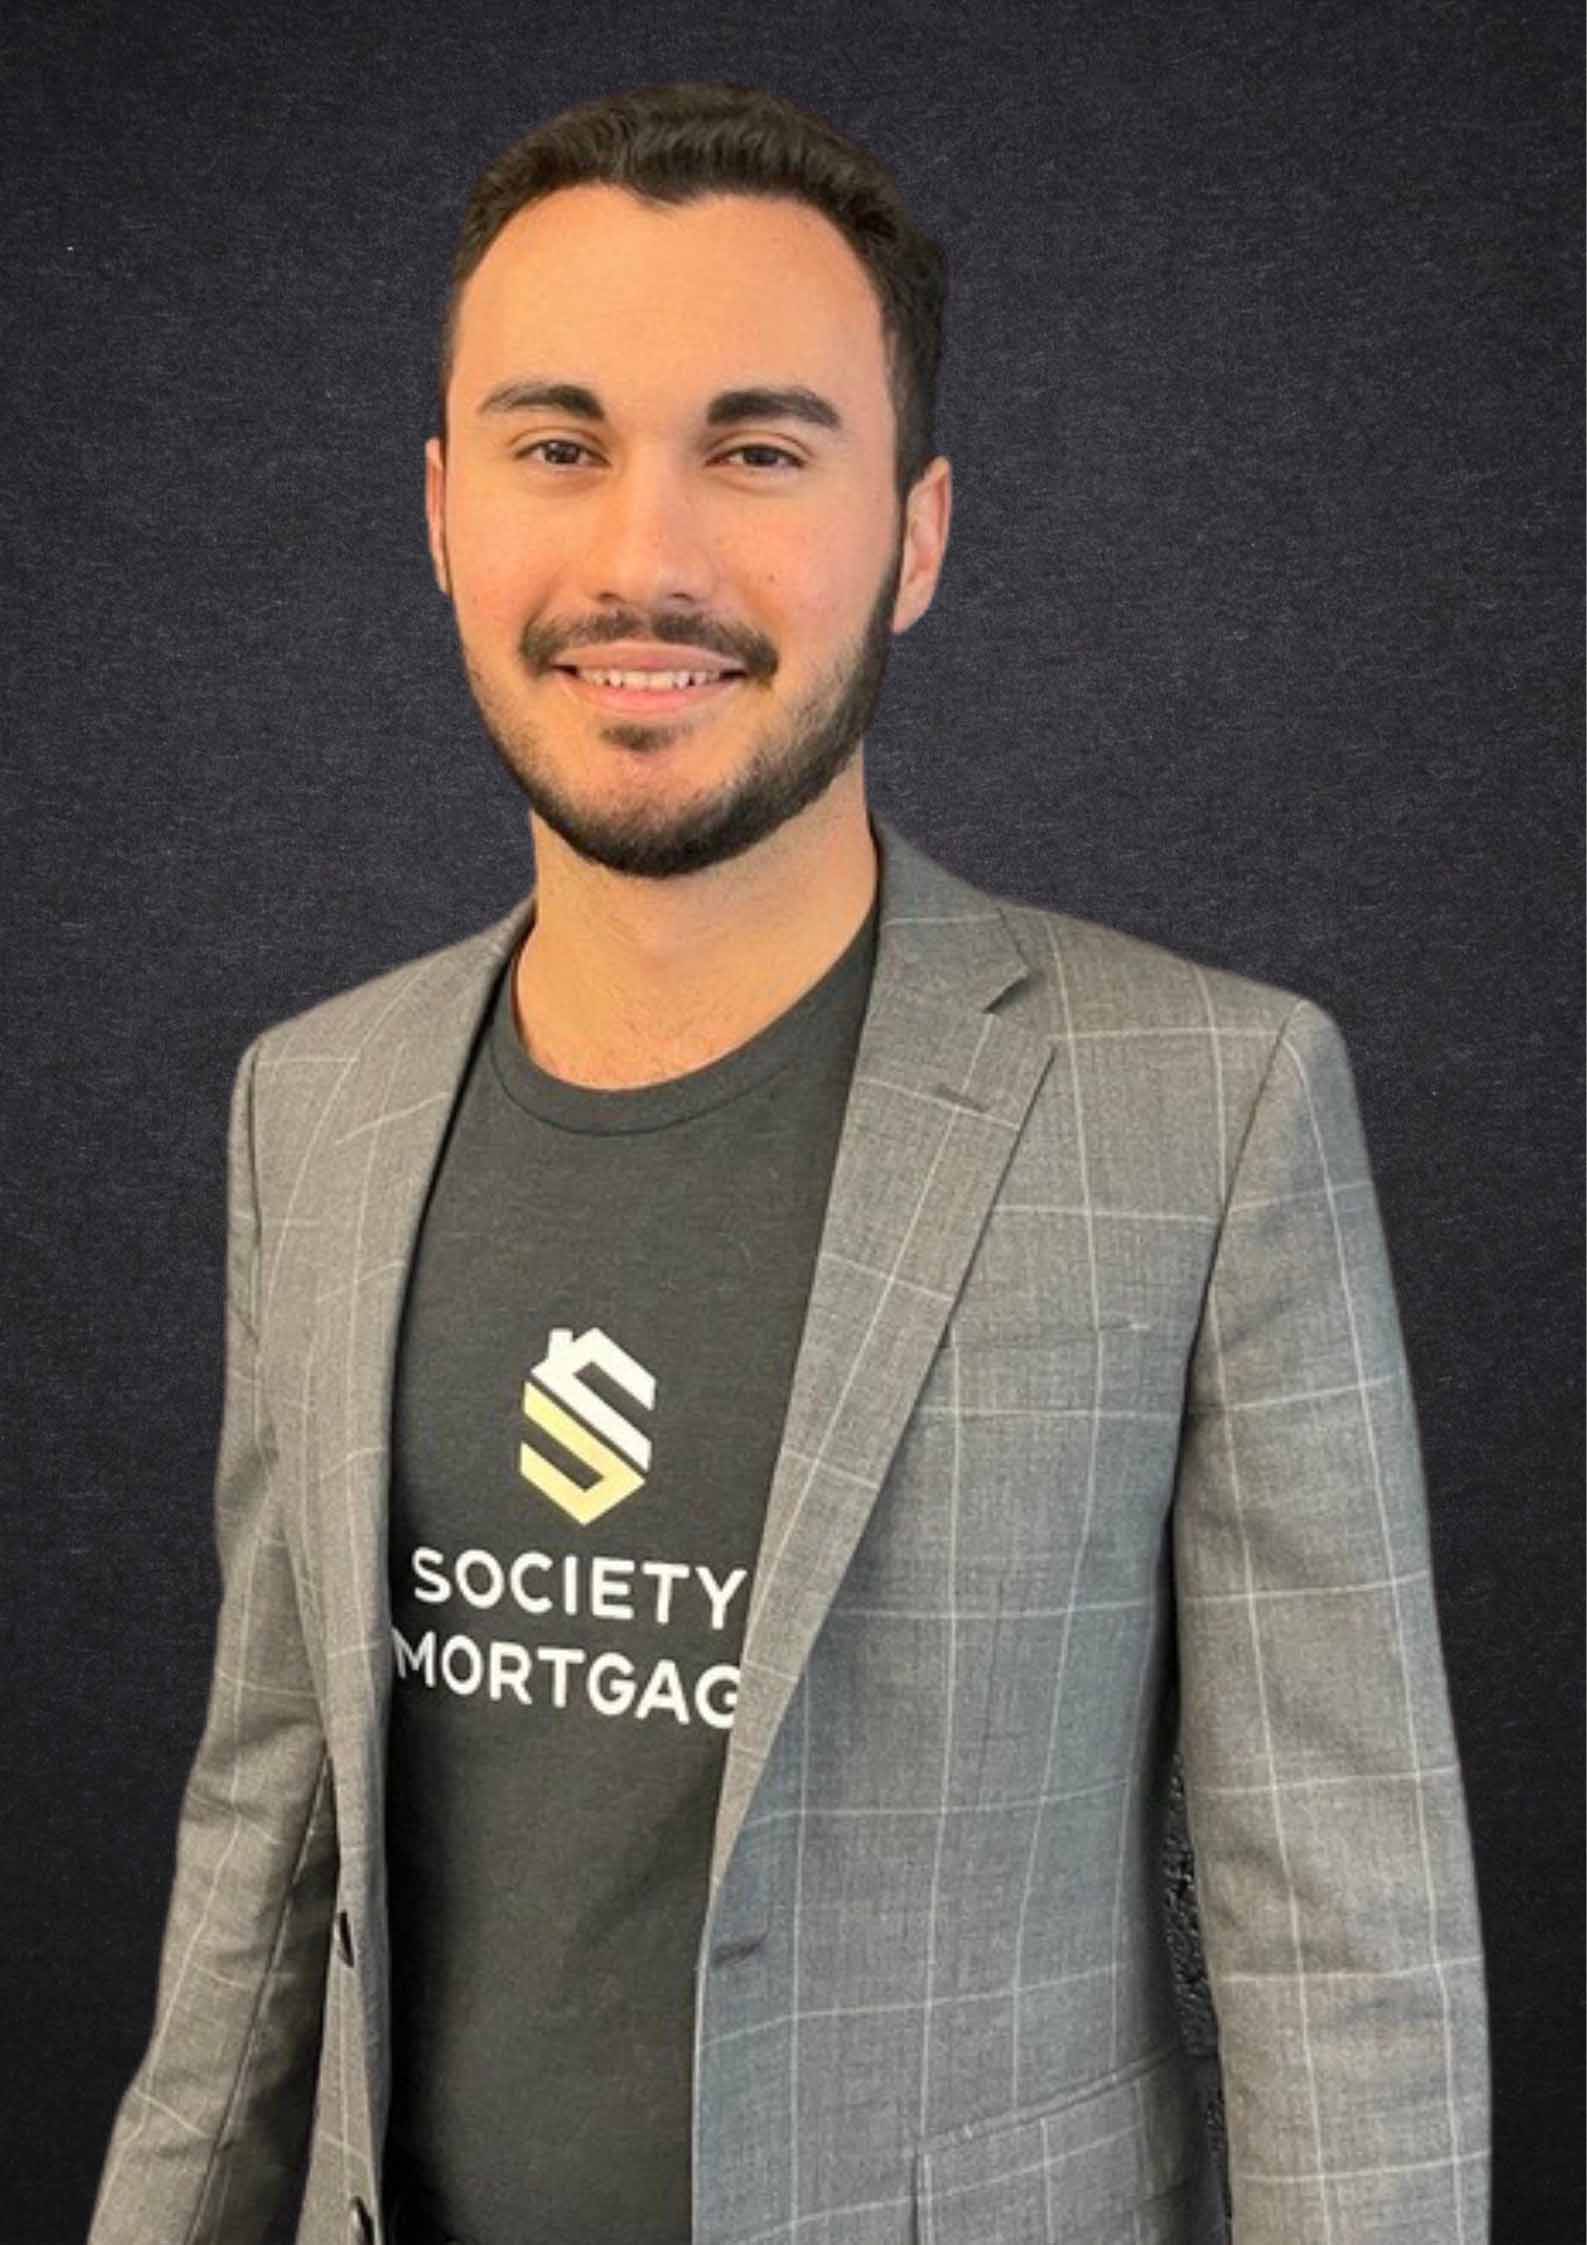 Our loan officer Luis Nieto working for Society Mortgage